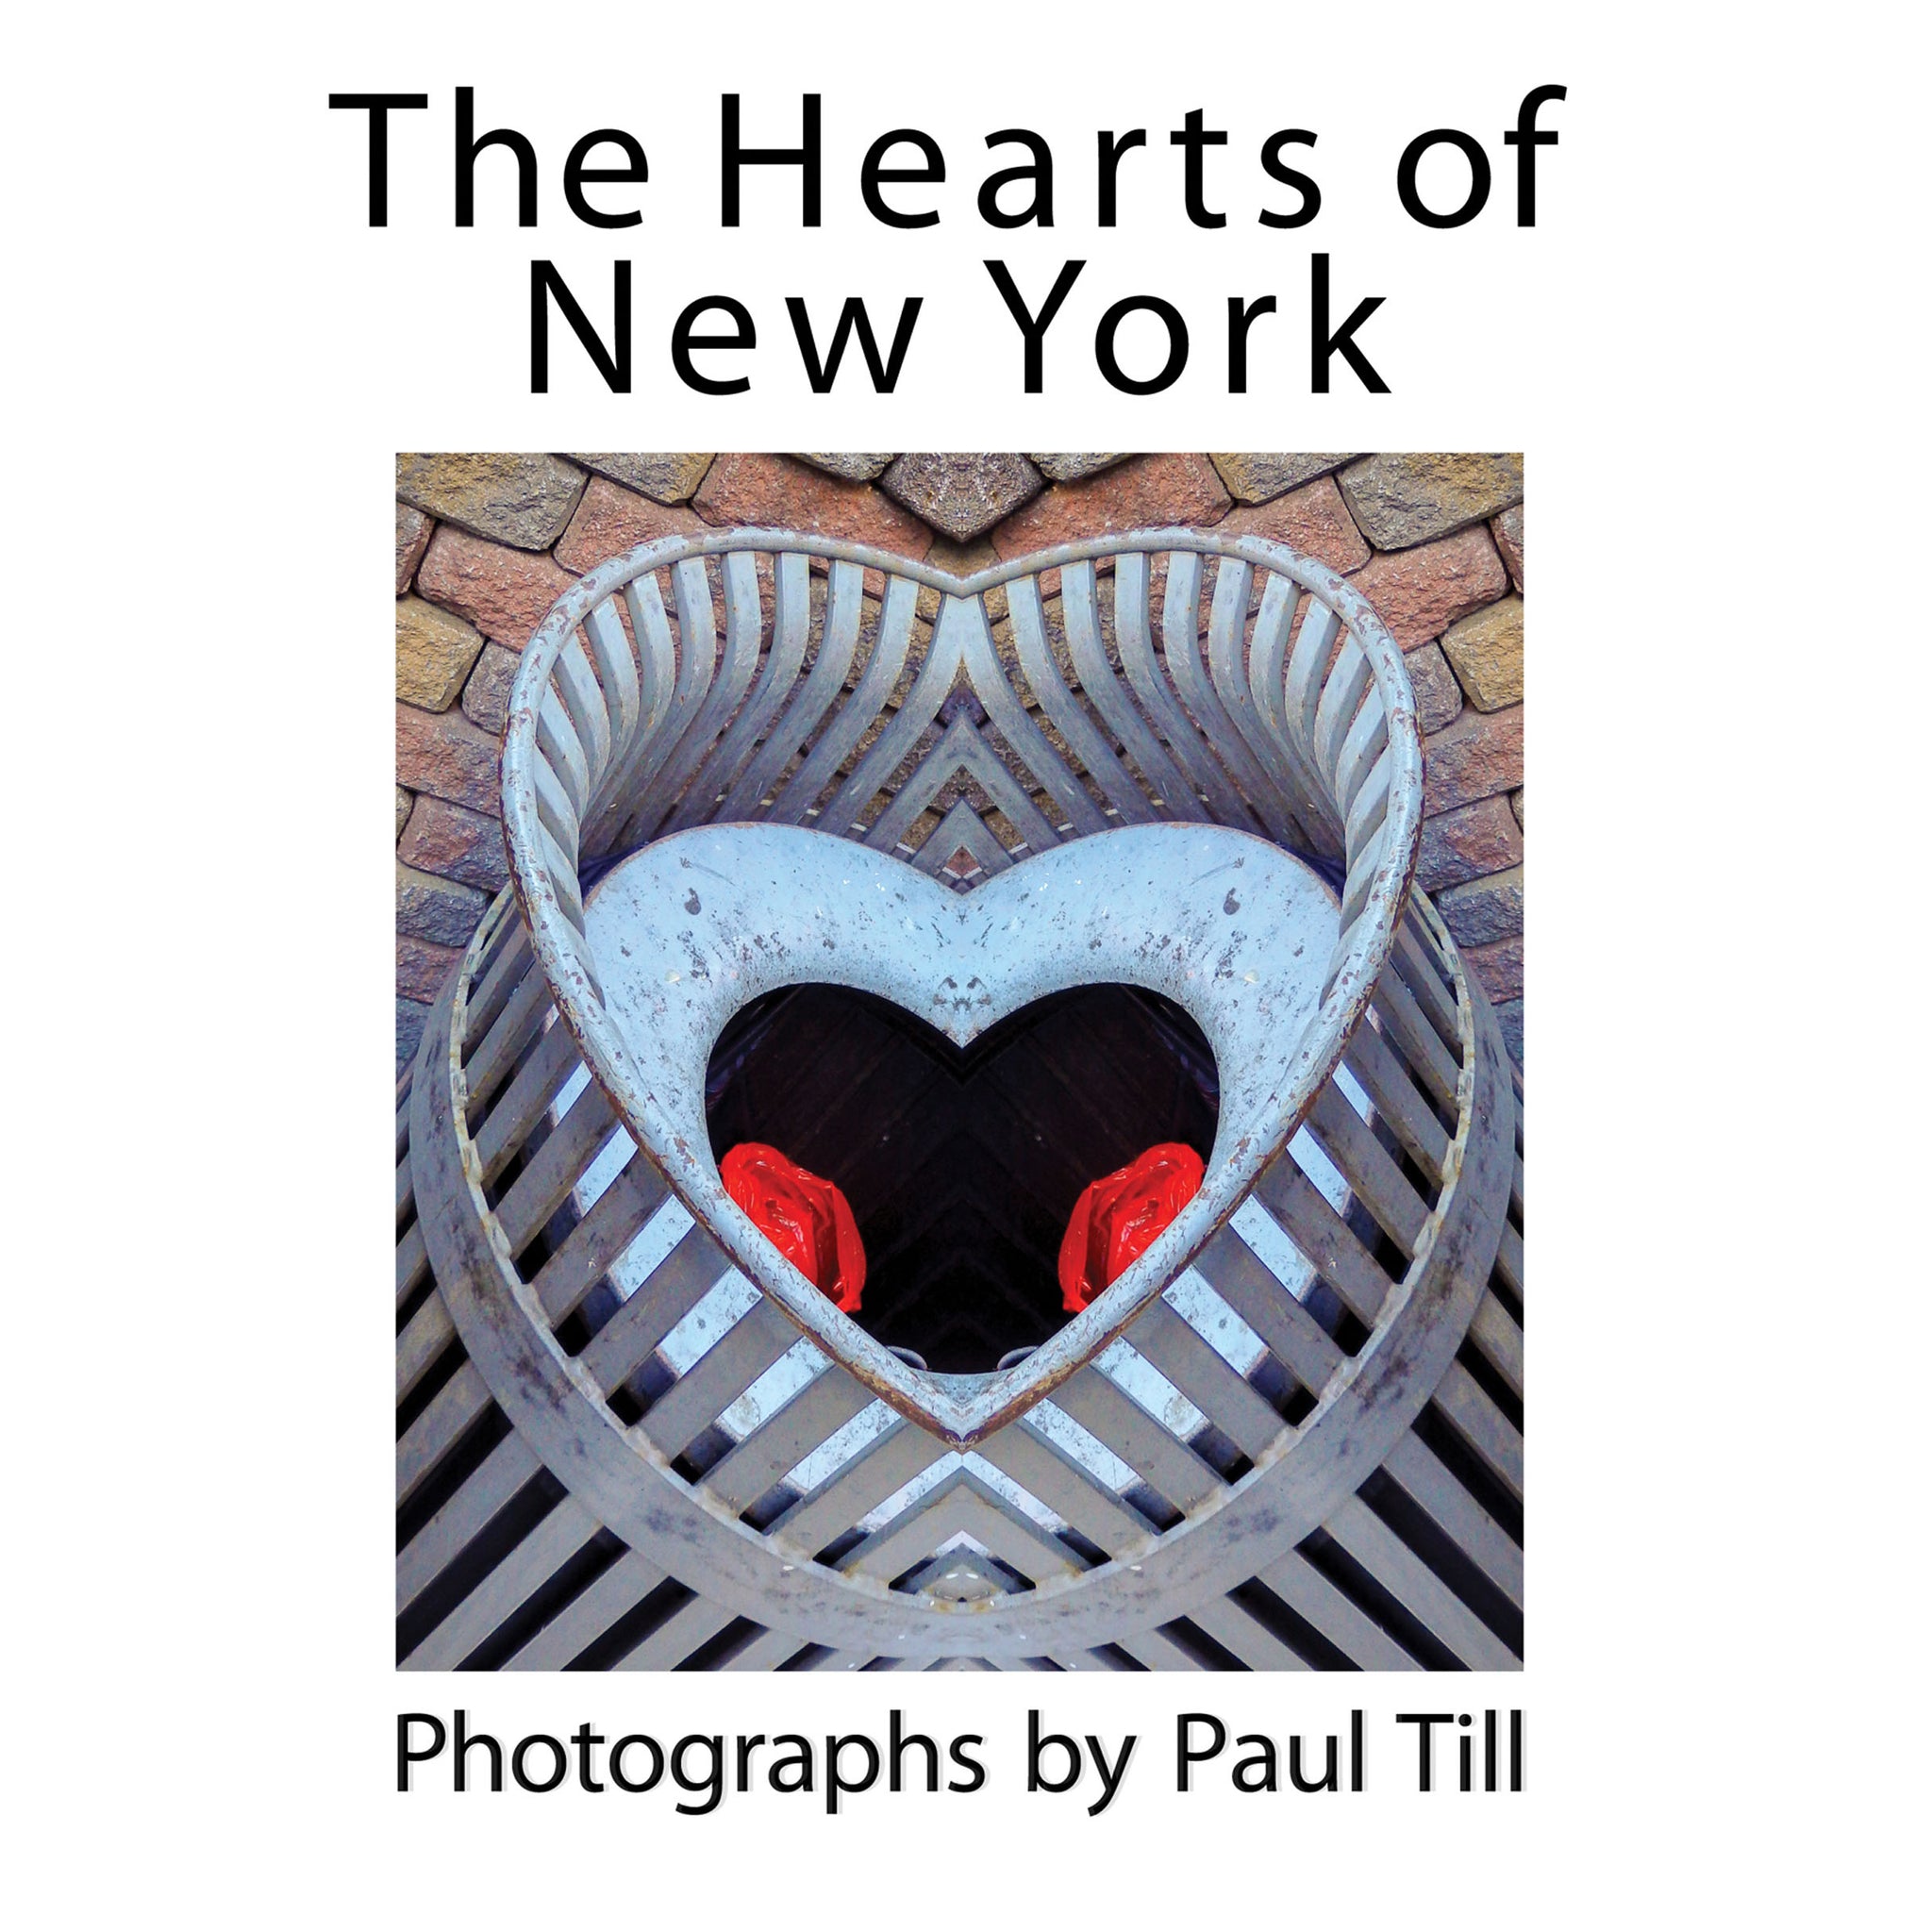 The Hearts of New York